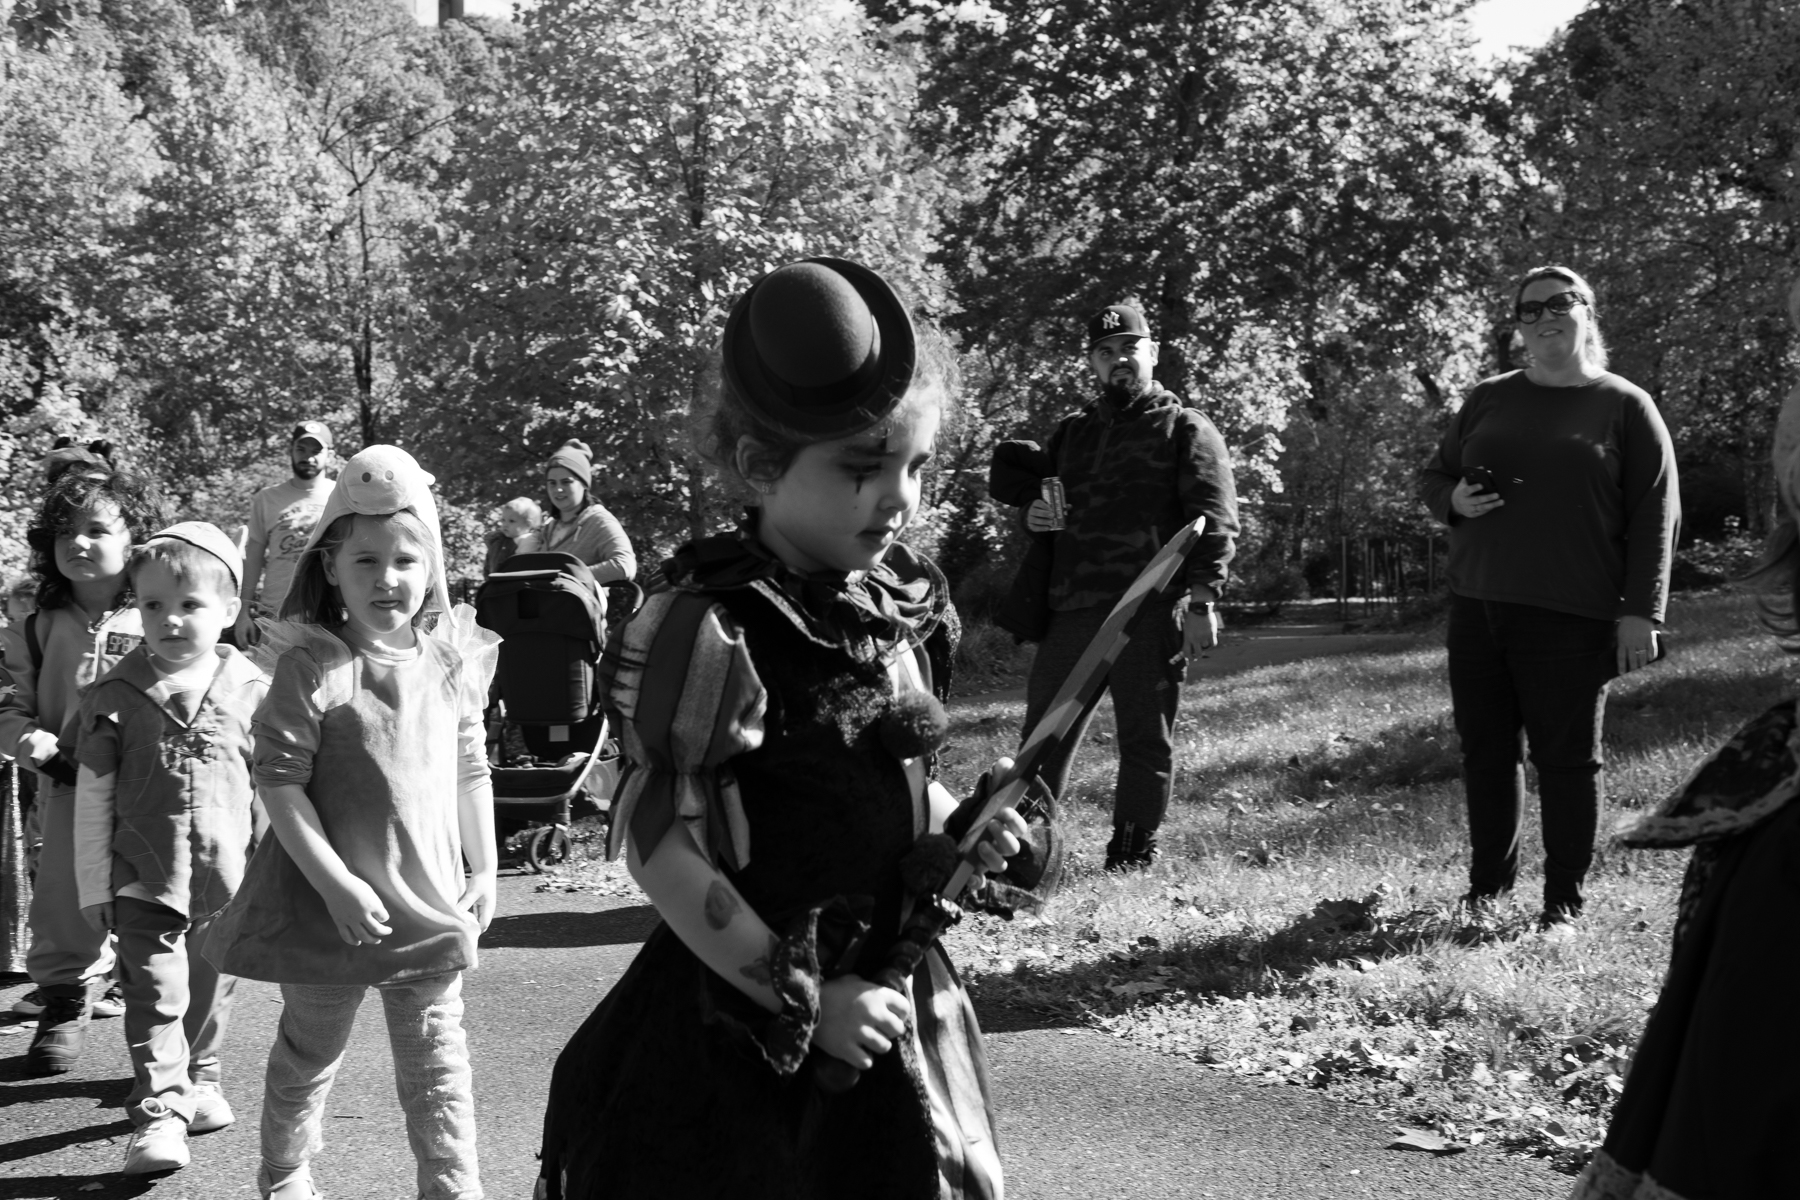 A young girl wearing a costume walks at the annual Come as You Art event as parents watch on the Karl Stirner Arts Trail.